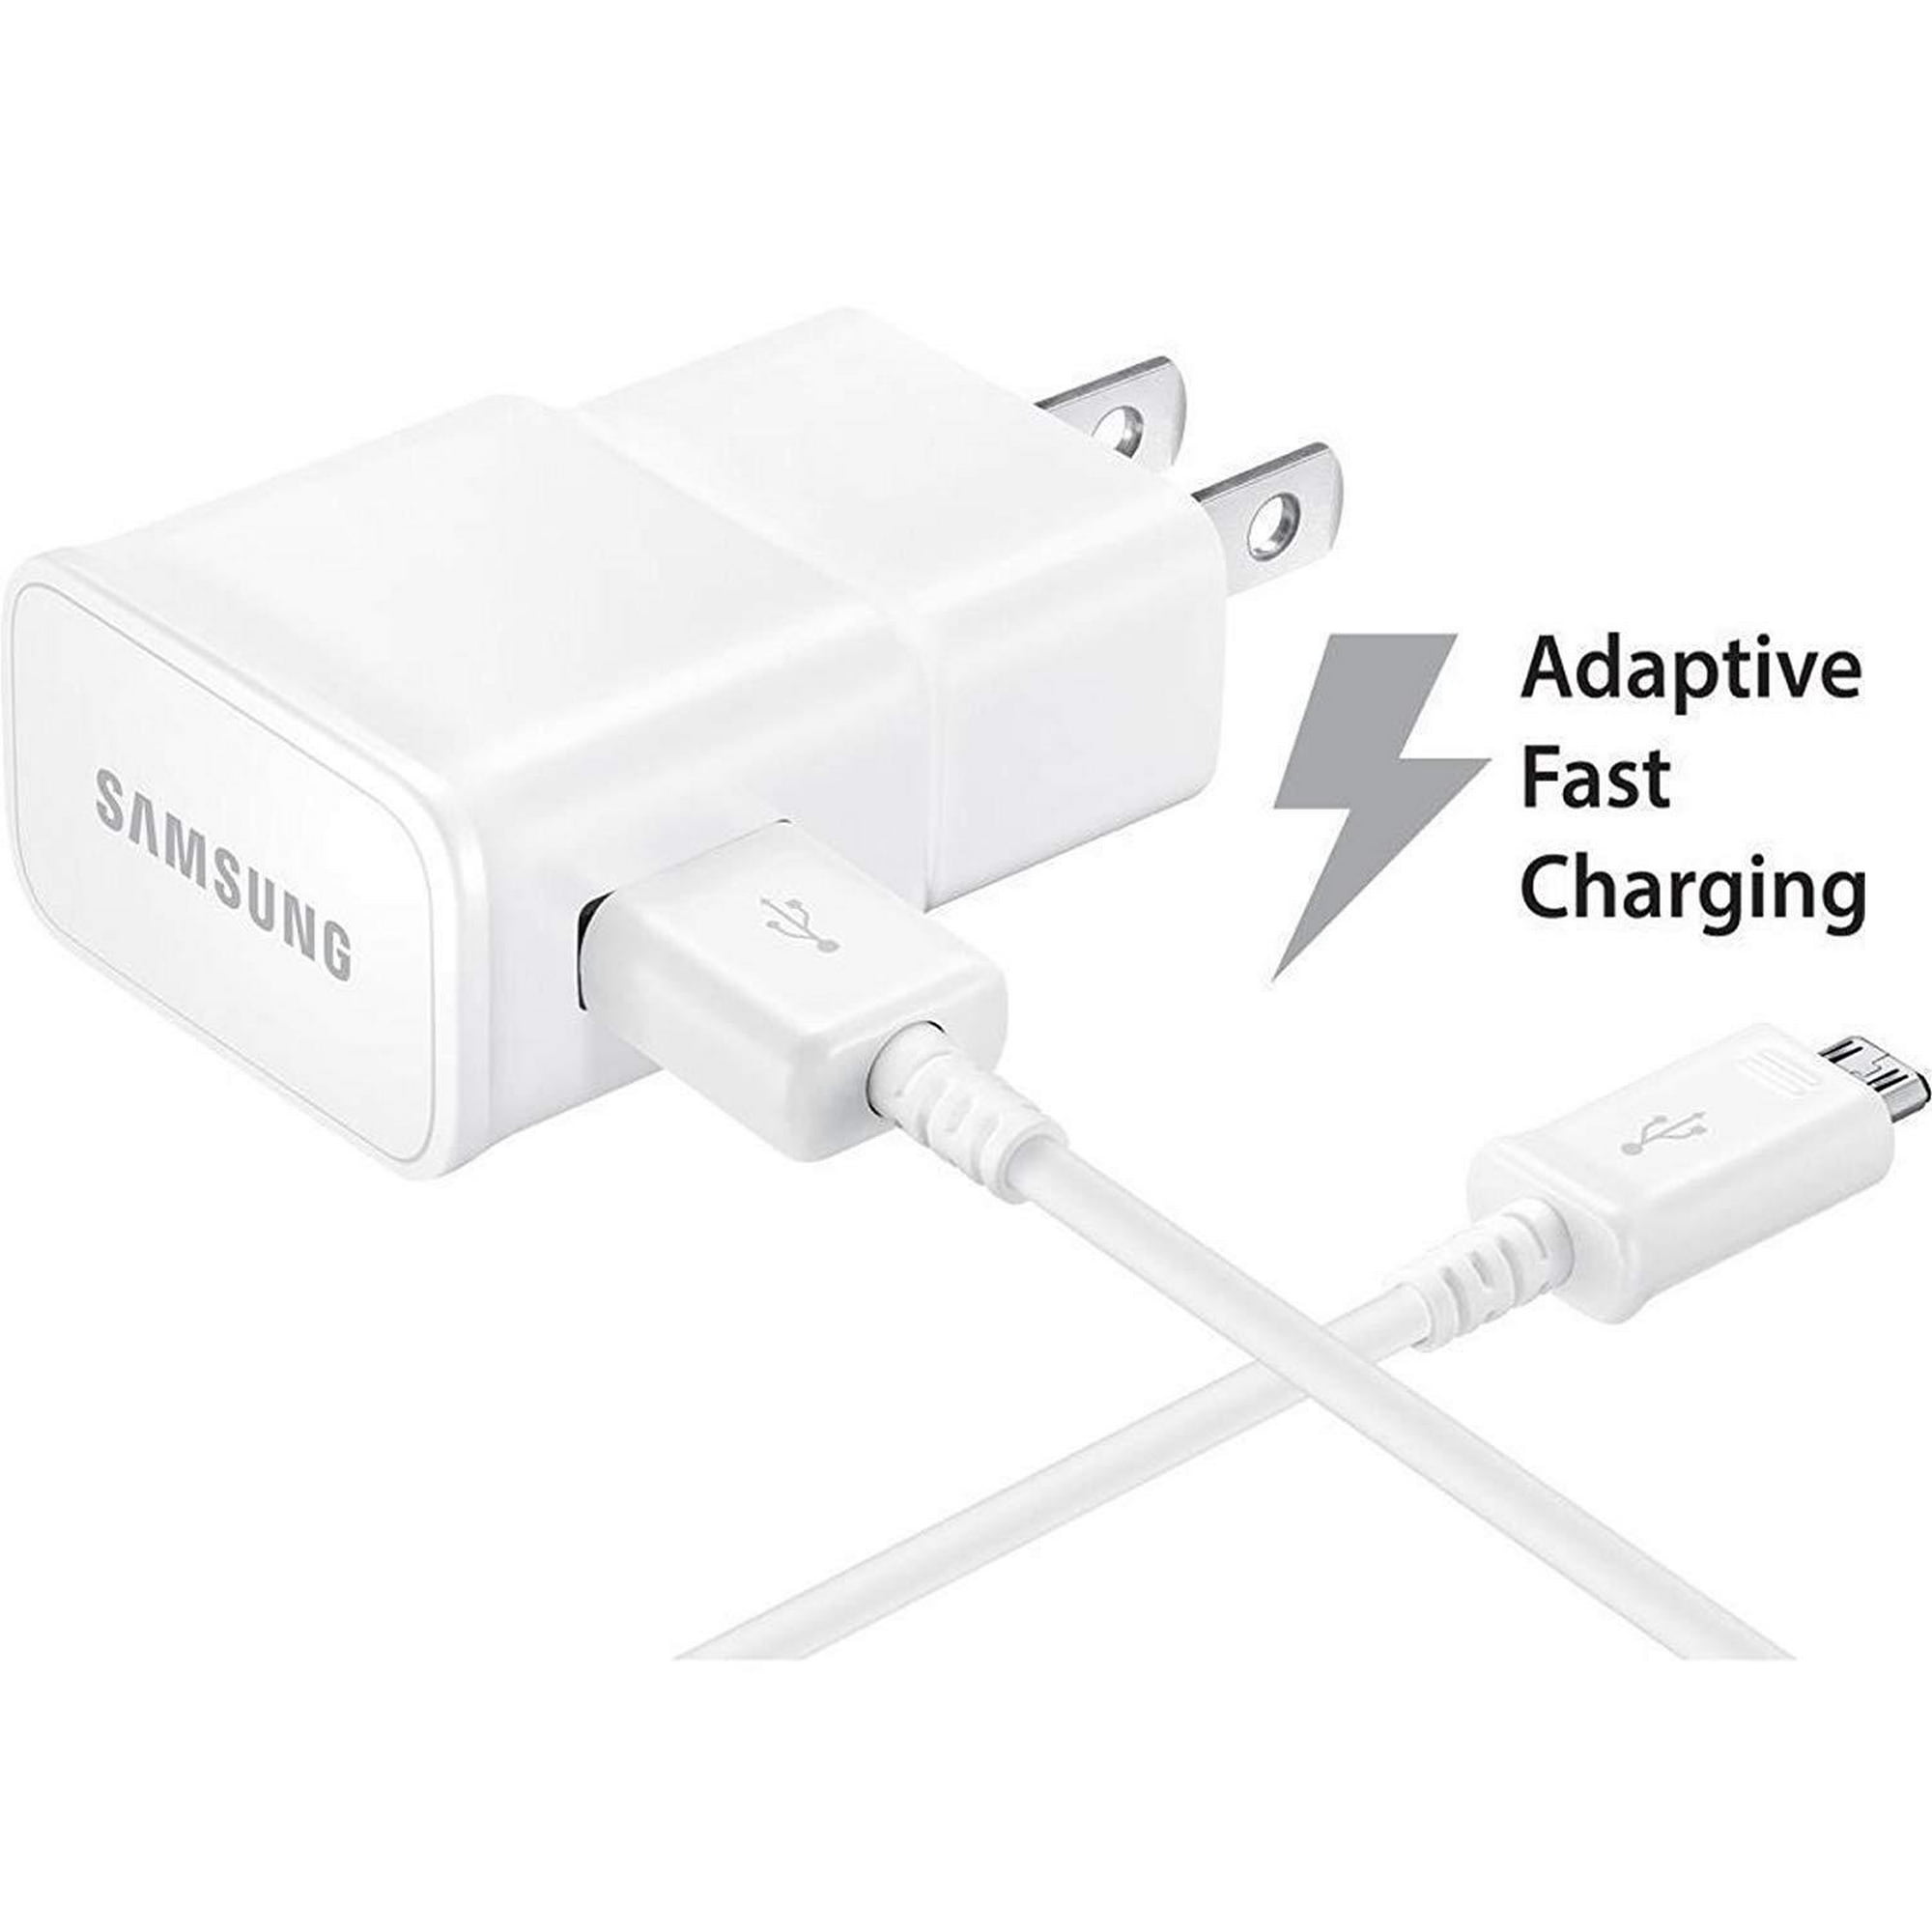 Adaptive Fast Charger Compatible with Samsung Galaxy S5 / Galaxy S5 [Wall Charger + 5 Feet USB Cable] WHITE Walmart.com